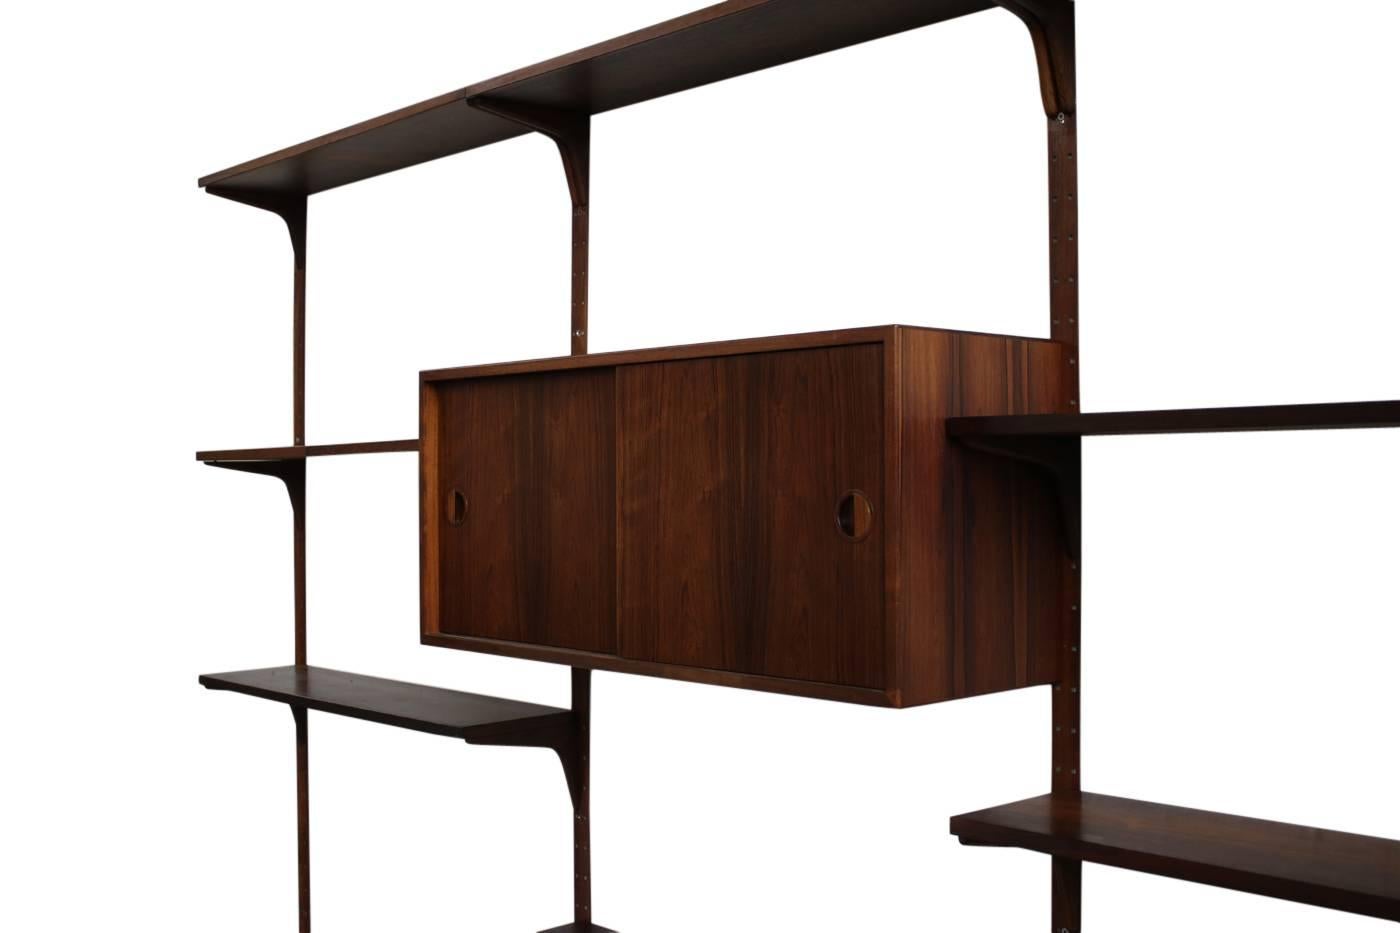 Large Danish 1960s Rosewood Wall Unit by Rud Thygesen for HG Møbler Shelf 4